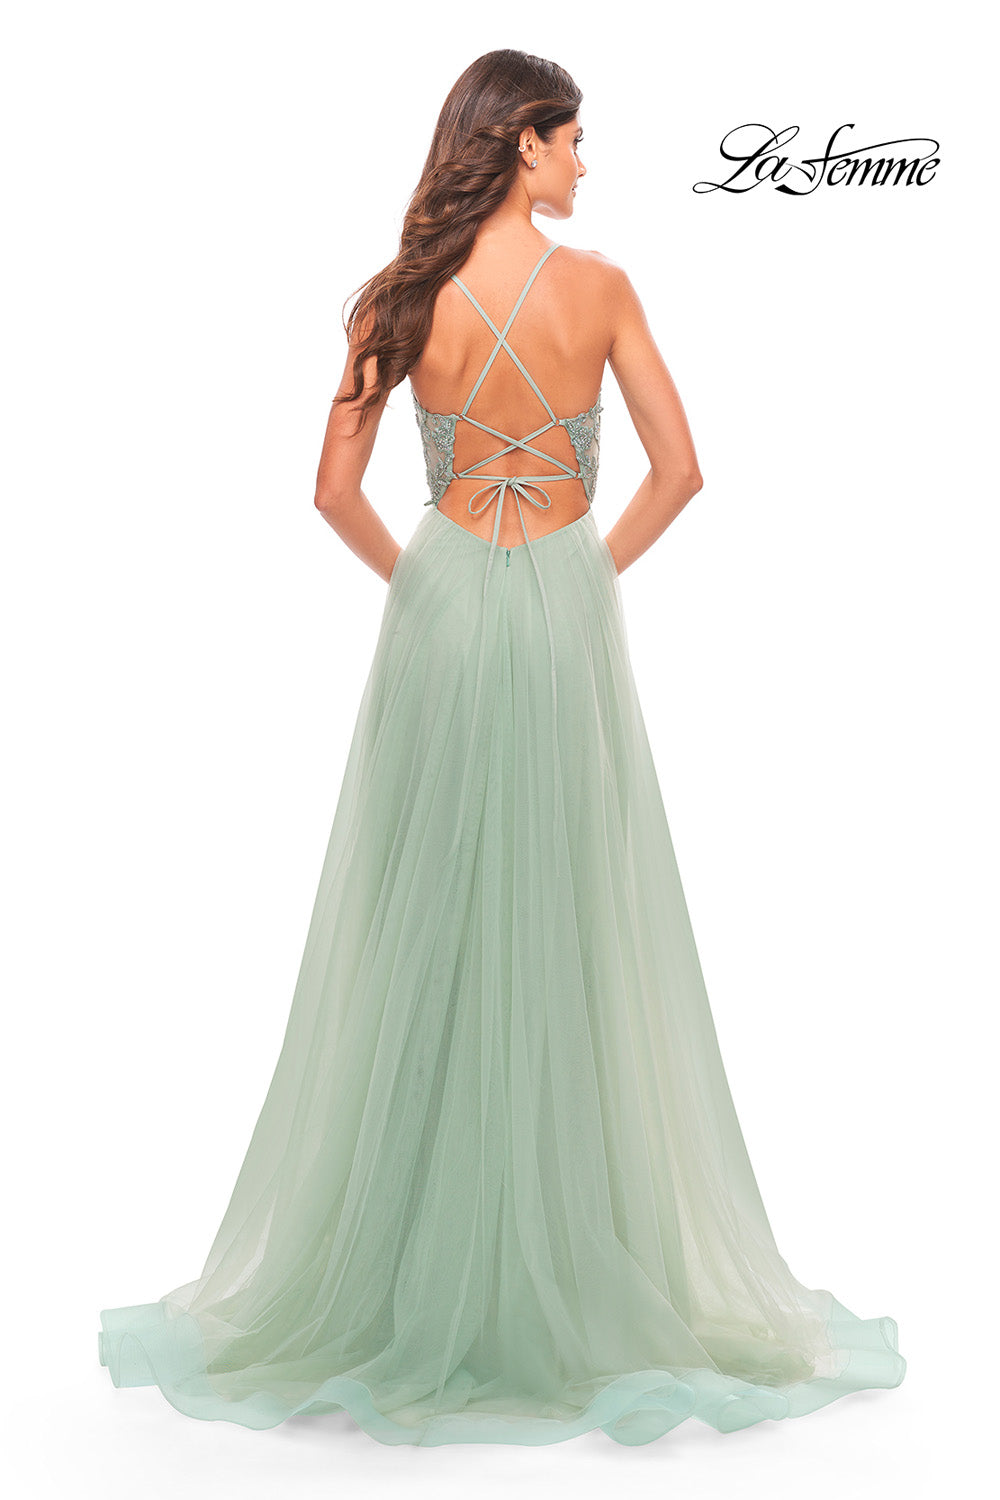 La Femme 31542 prom dress images.  La Femme 31542 is available in these colors: Light Periwinkle, Sage.